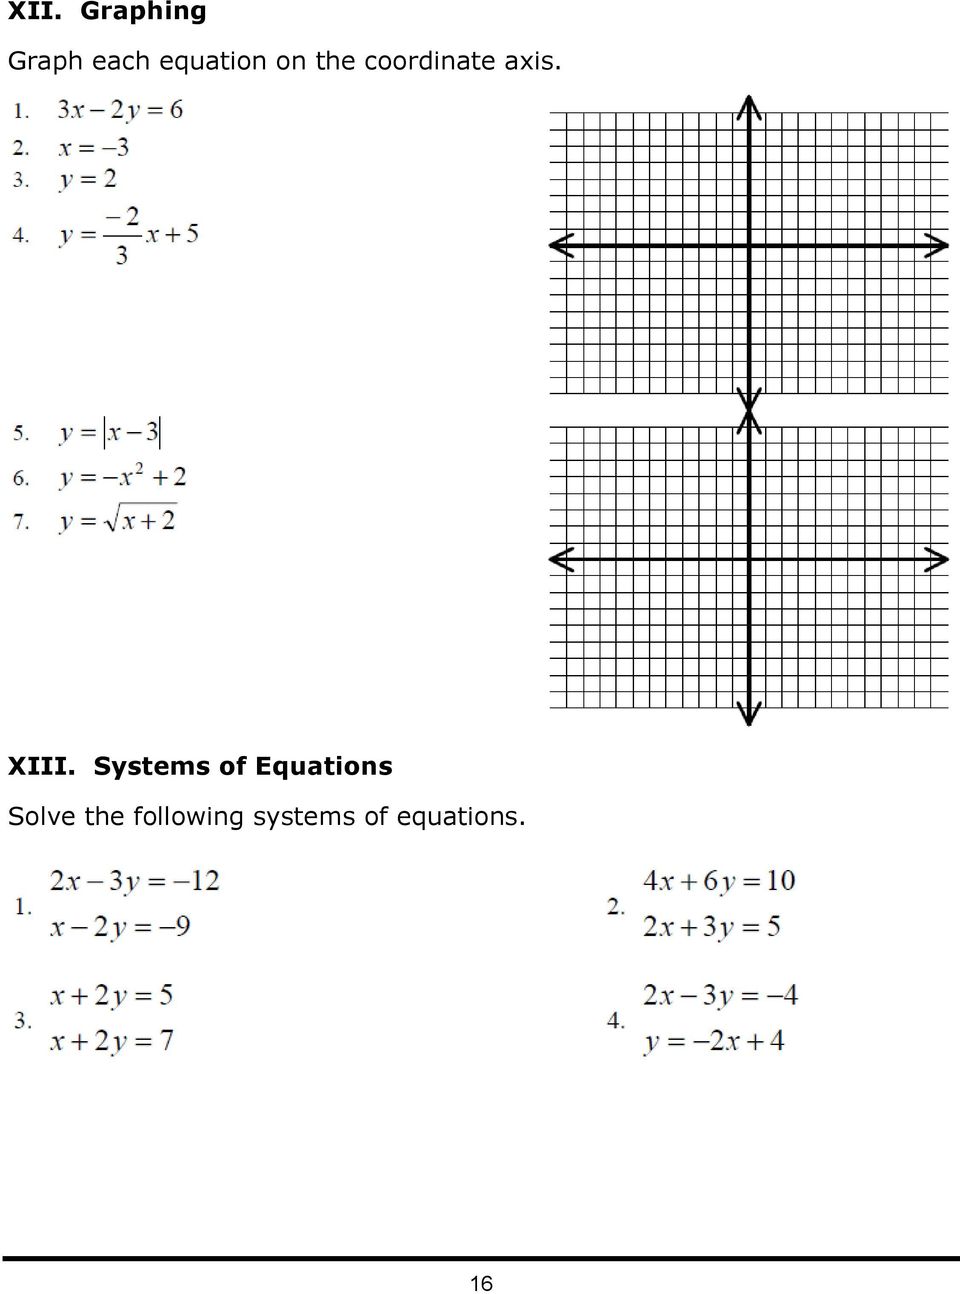 XIII. Systems of Equations Solve